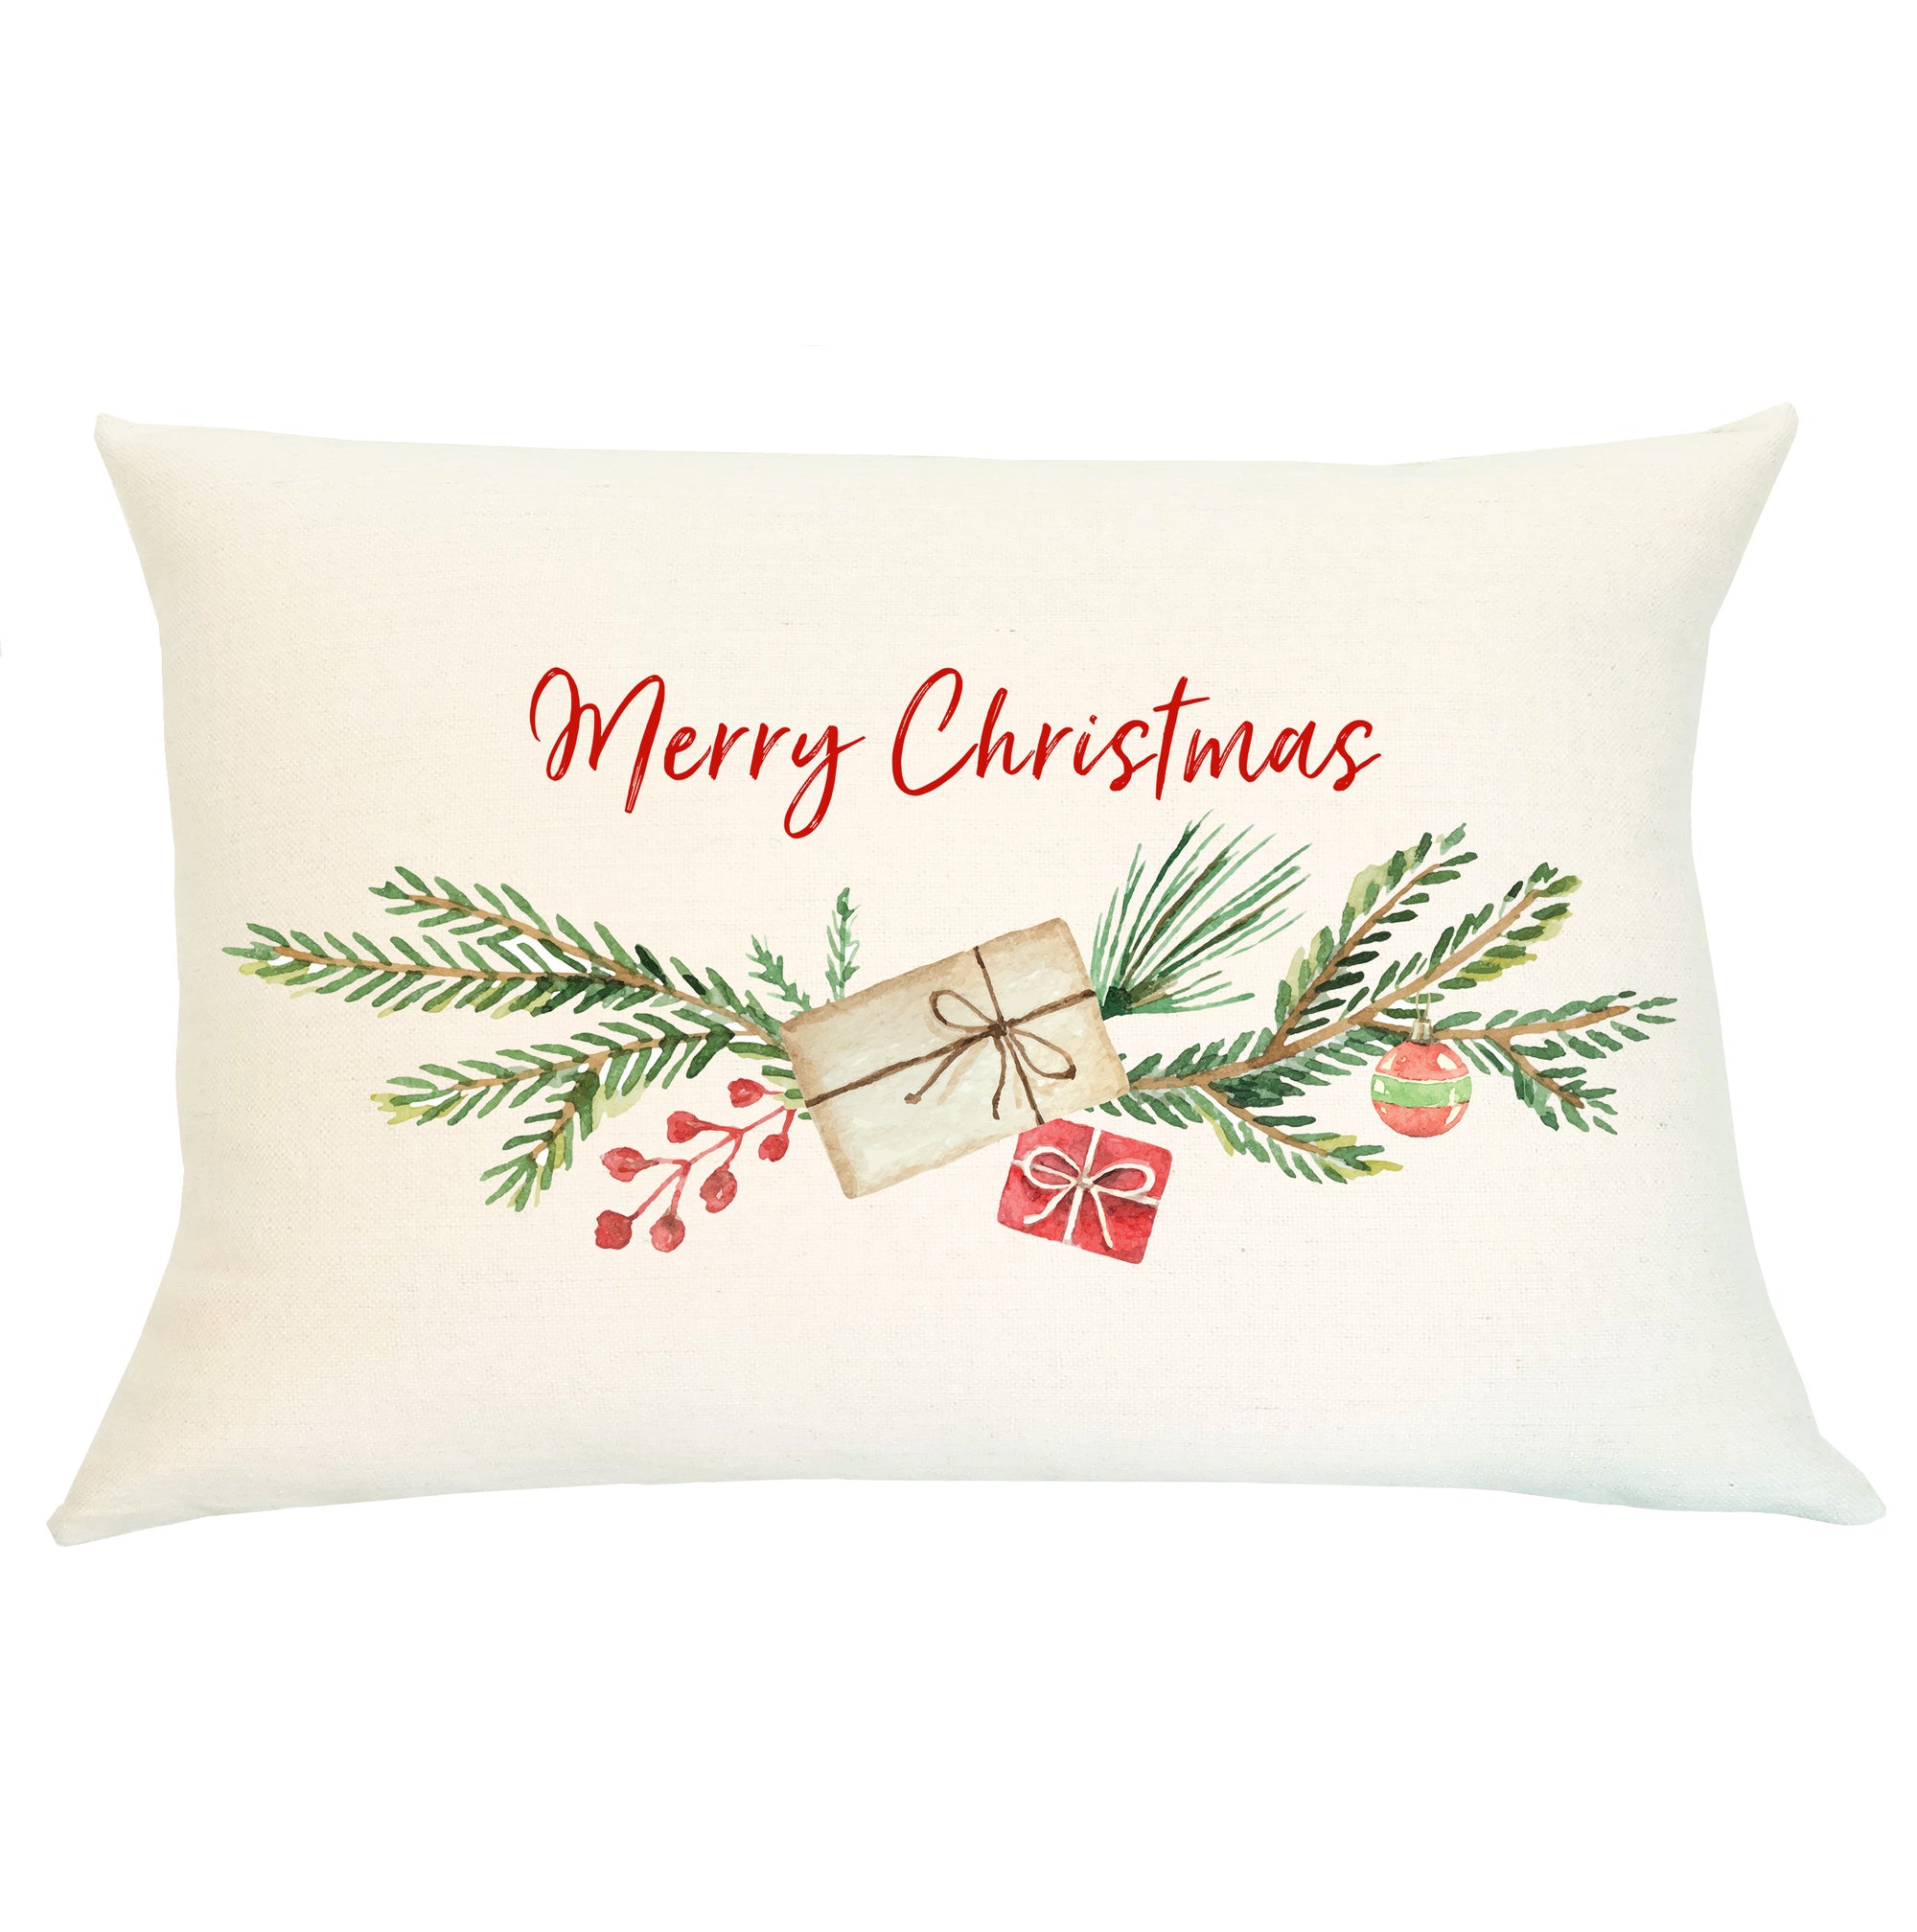 Pillow Lumbar - It's Christmas Time - Insert Included - South Austin Lane